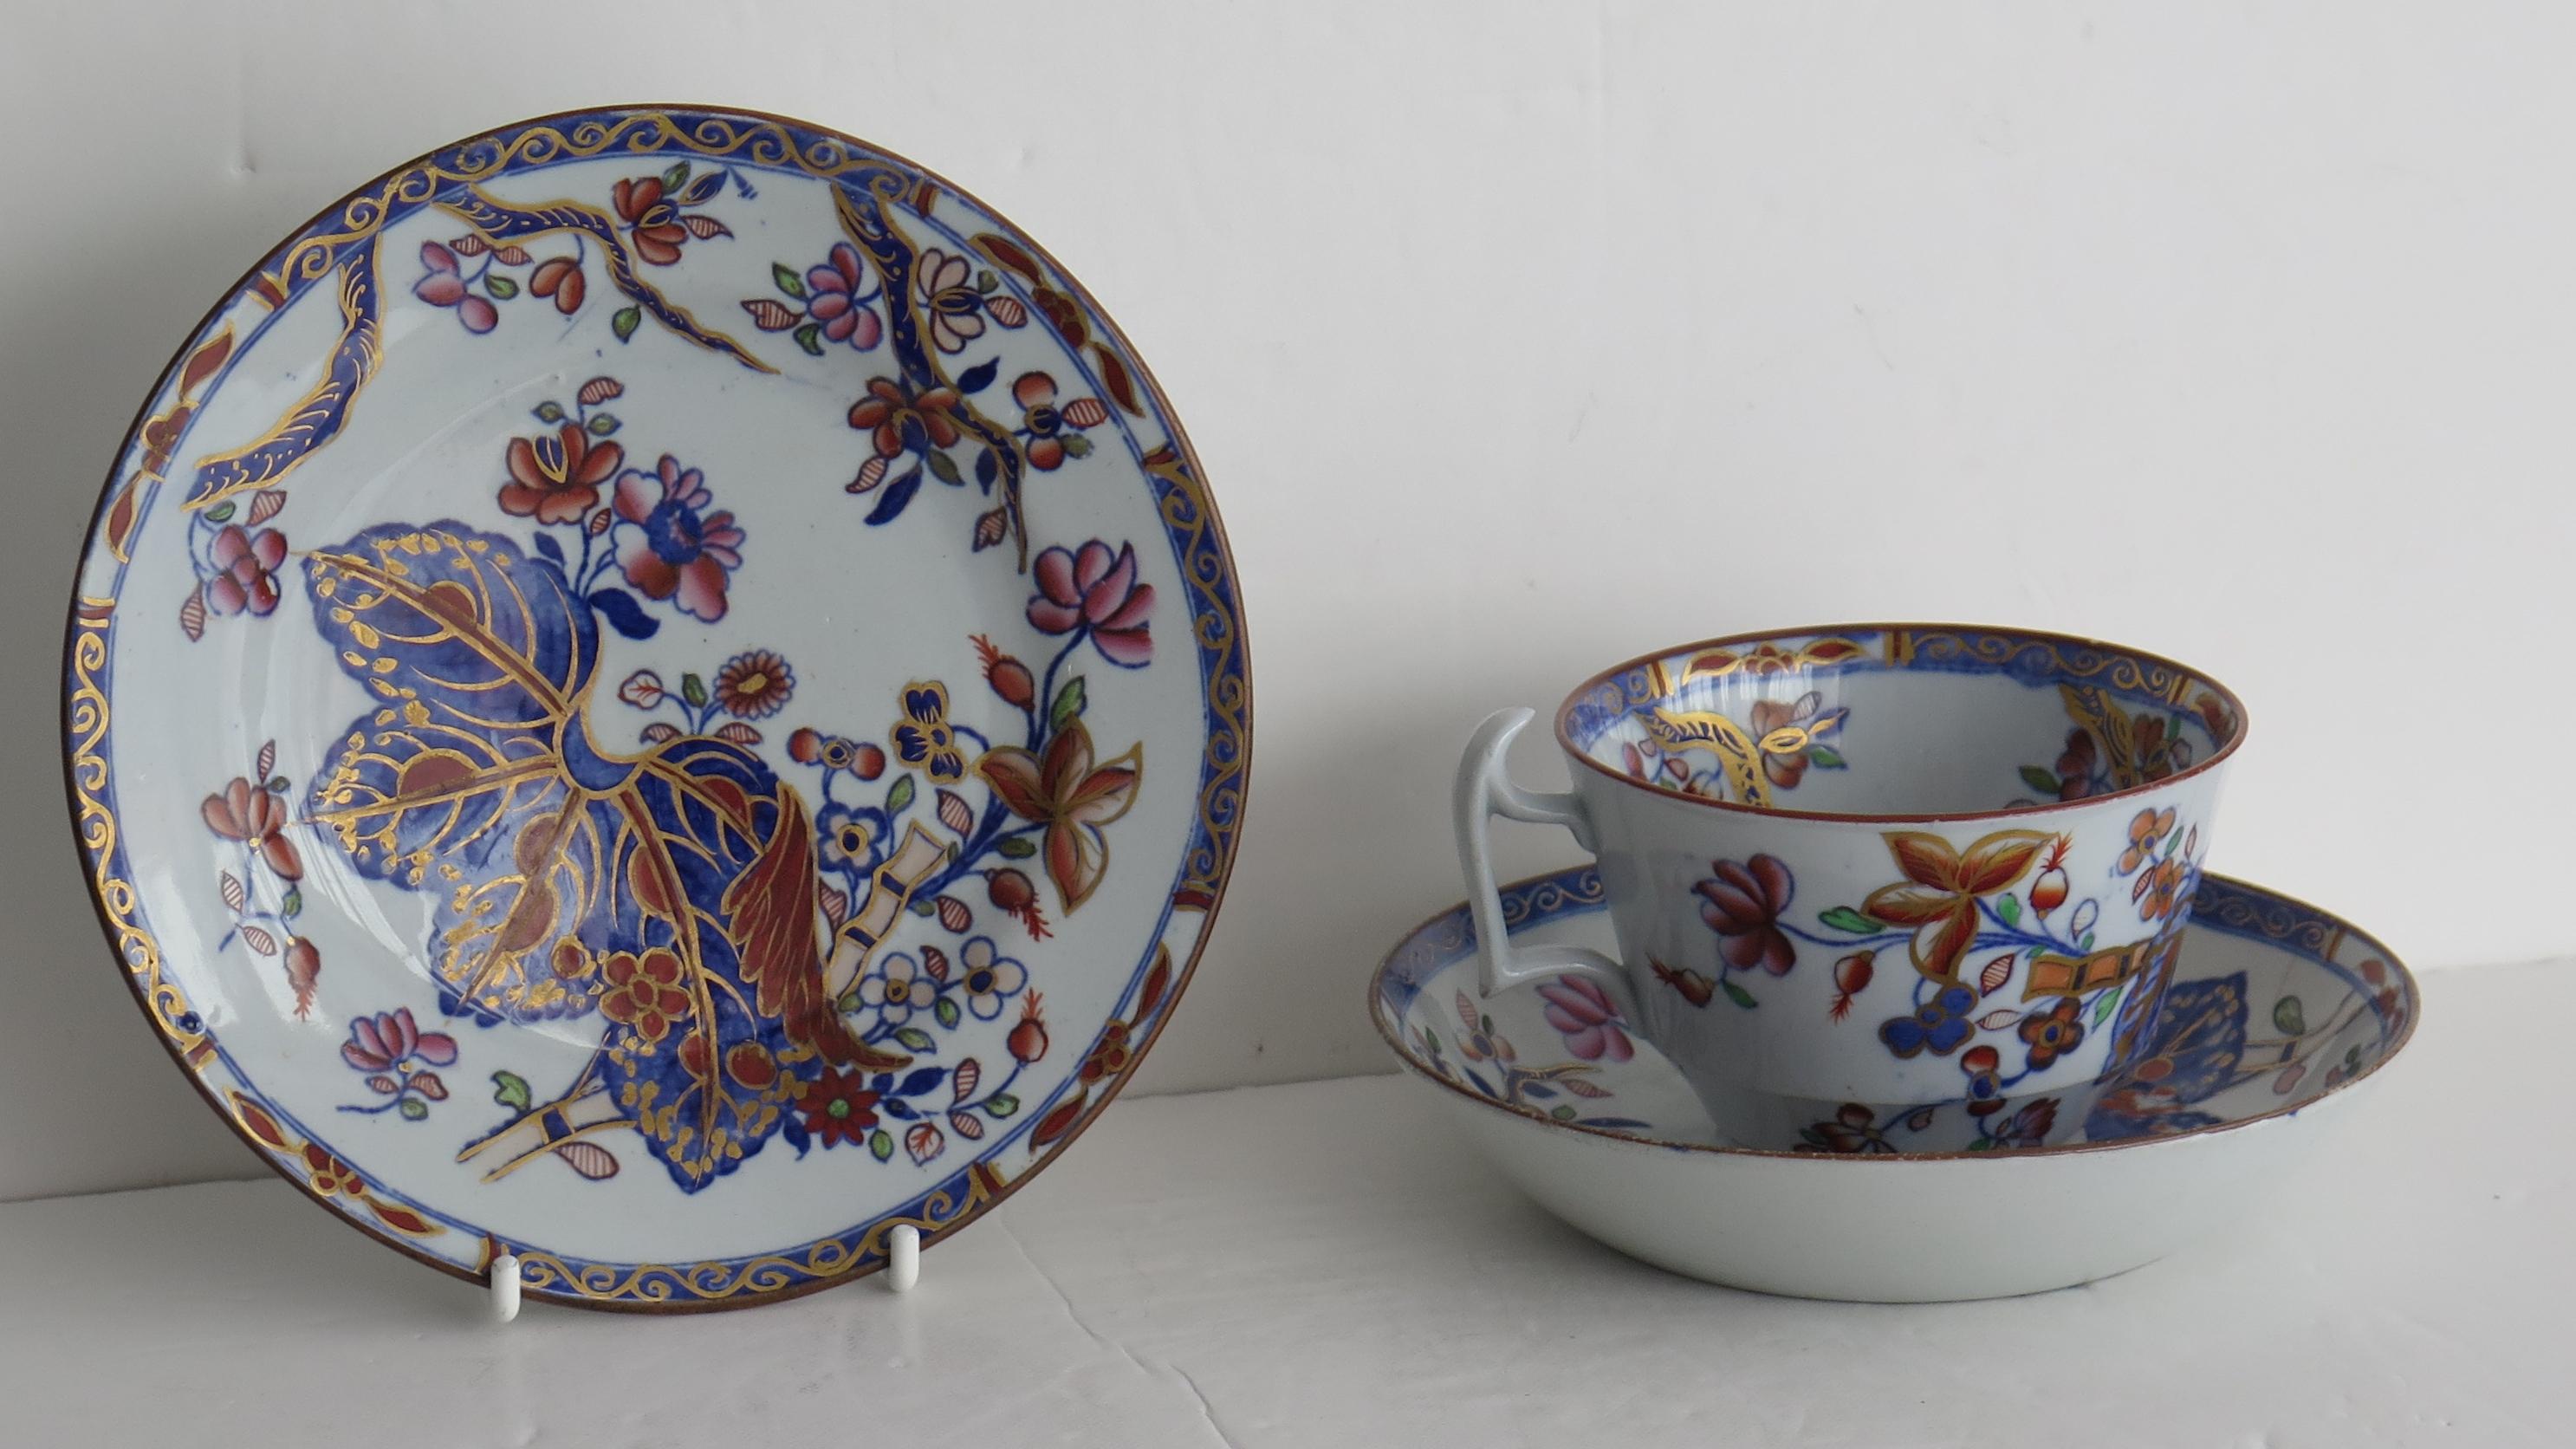 This is a good stone China (Ironstone) TRIO of three pieces, all in the hand - painted Tobacco Leaf pattern number 2061, made by the Spode / Copeland factory during the 19th century.

The three pieces are a harlequin set as follows;
Side Plate -